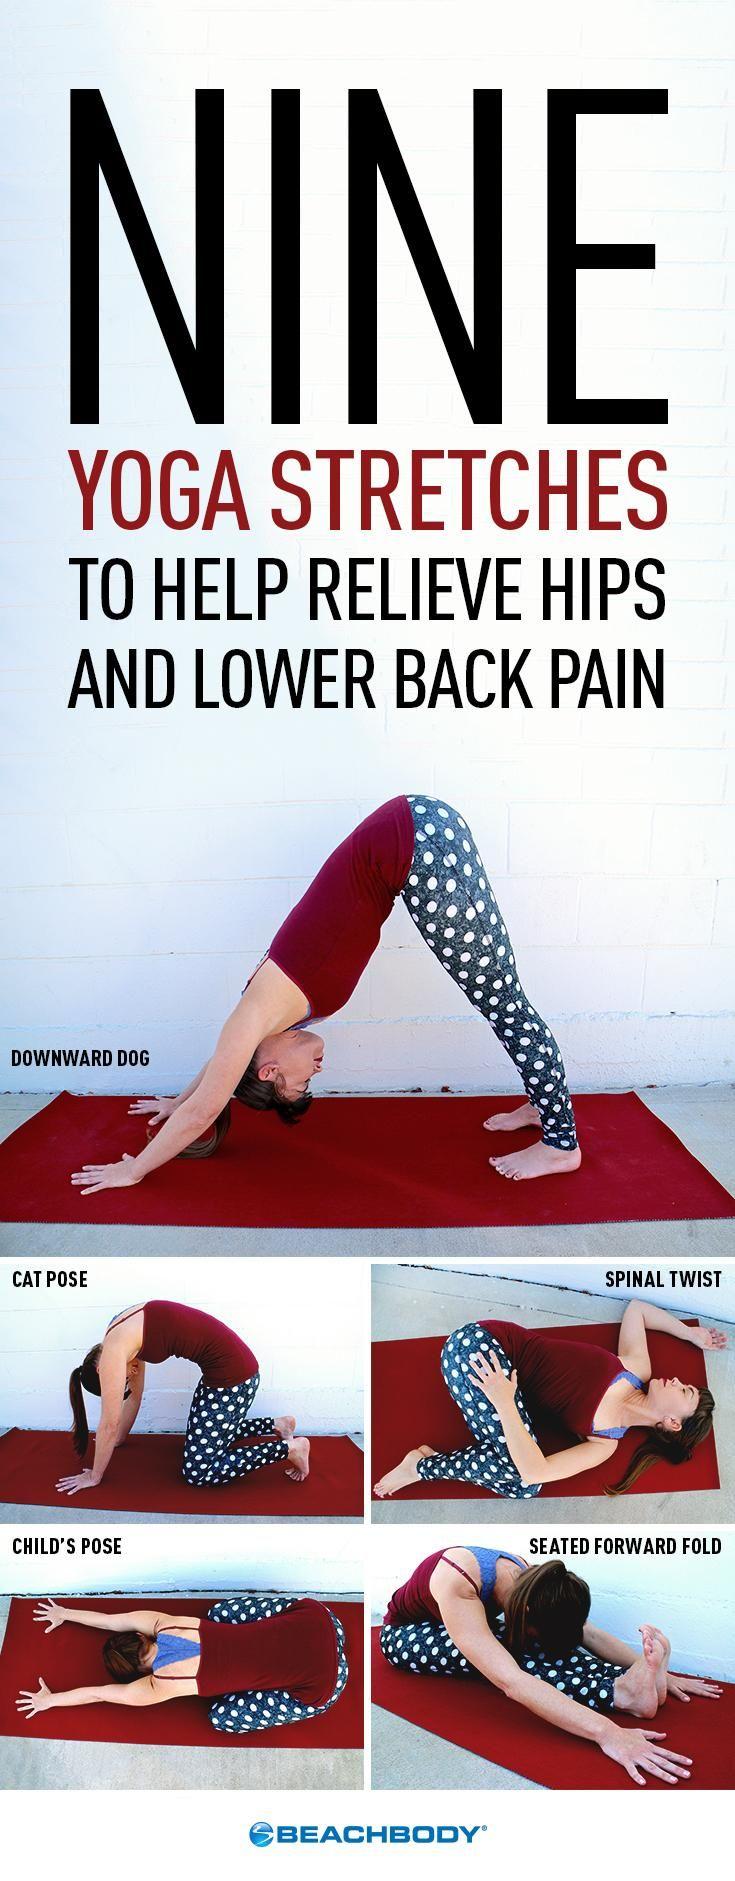 Wedding - 9 More Yoga Stretches To Help Relieve Hip And Lower Back Pain